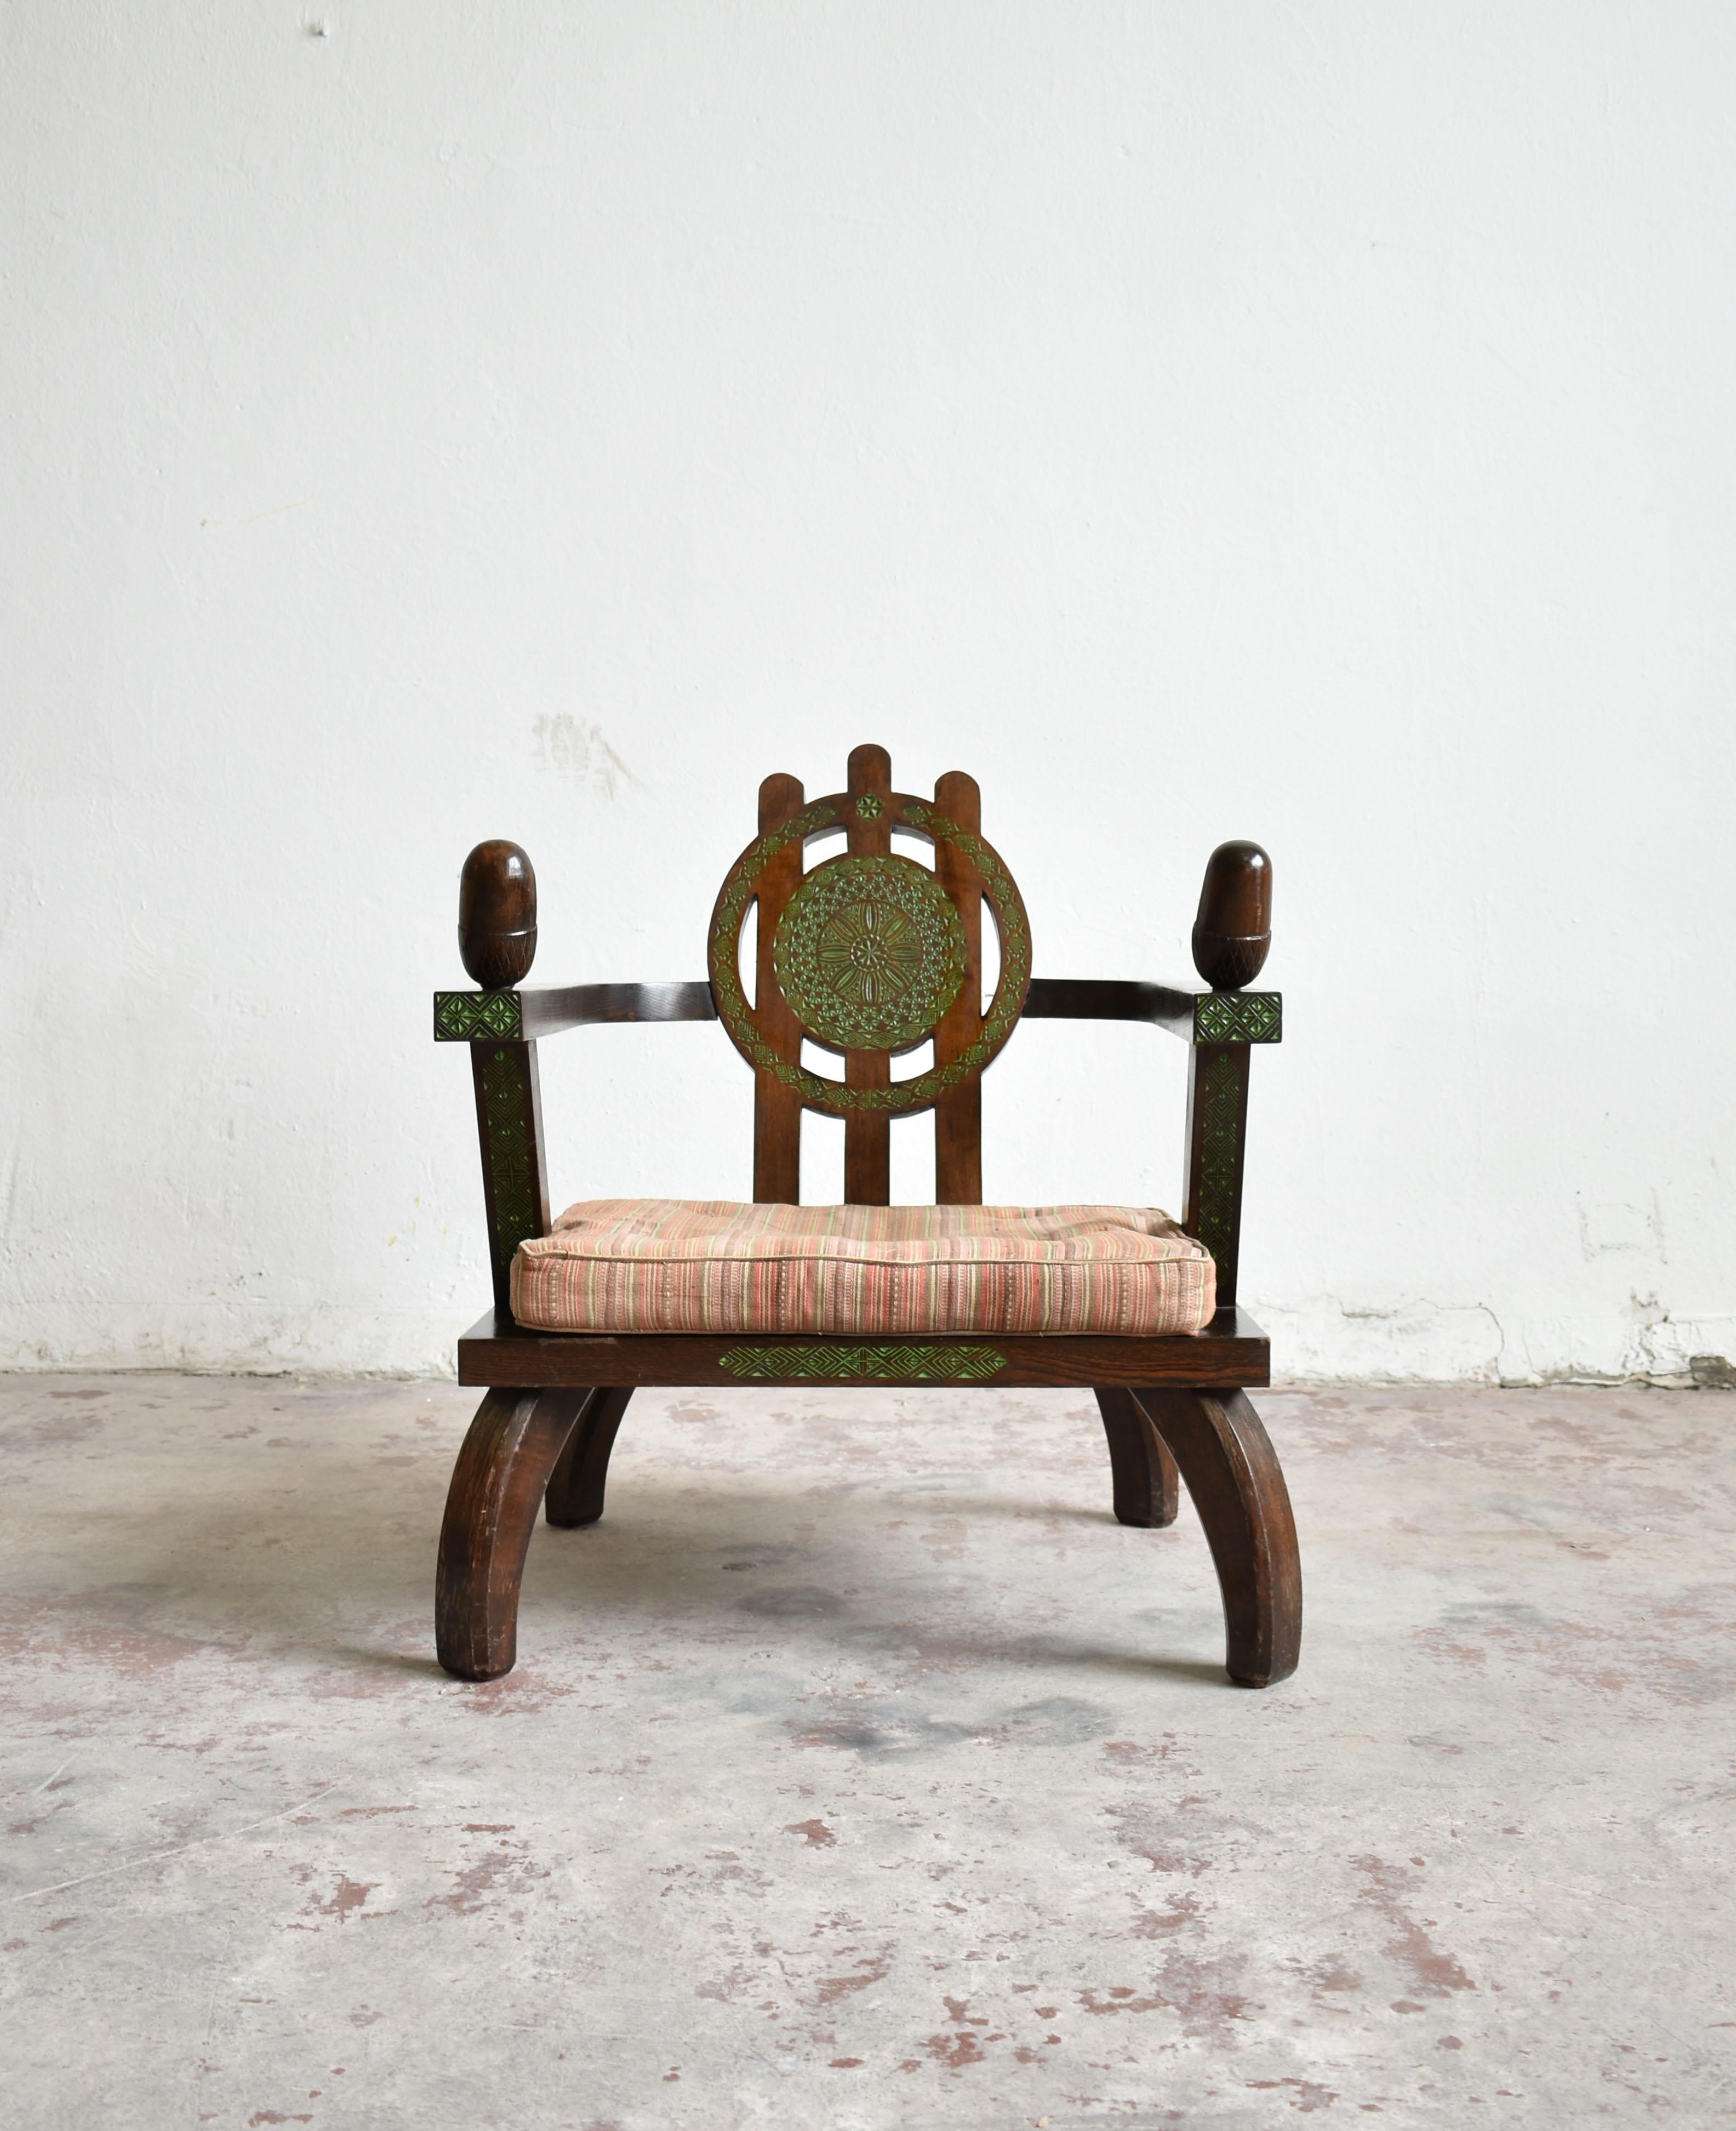 Unique wooden lounge chair by Italian furniture maker Ettore Zaccari (1877–1922)

Manufactured in the early 20th century

The frame of the chair is made of solid oak wood with hand carved details painted in green. The chair has a removable